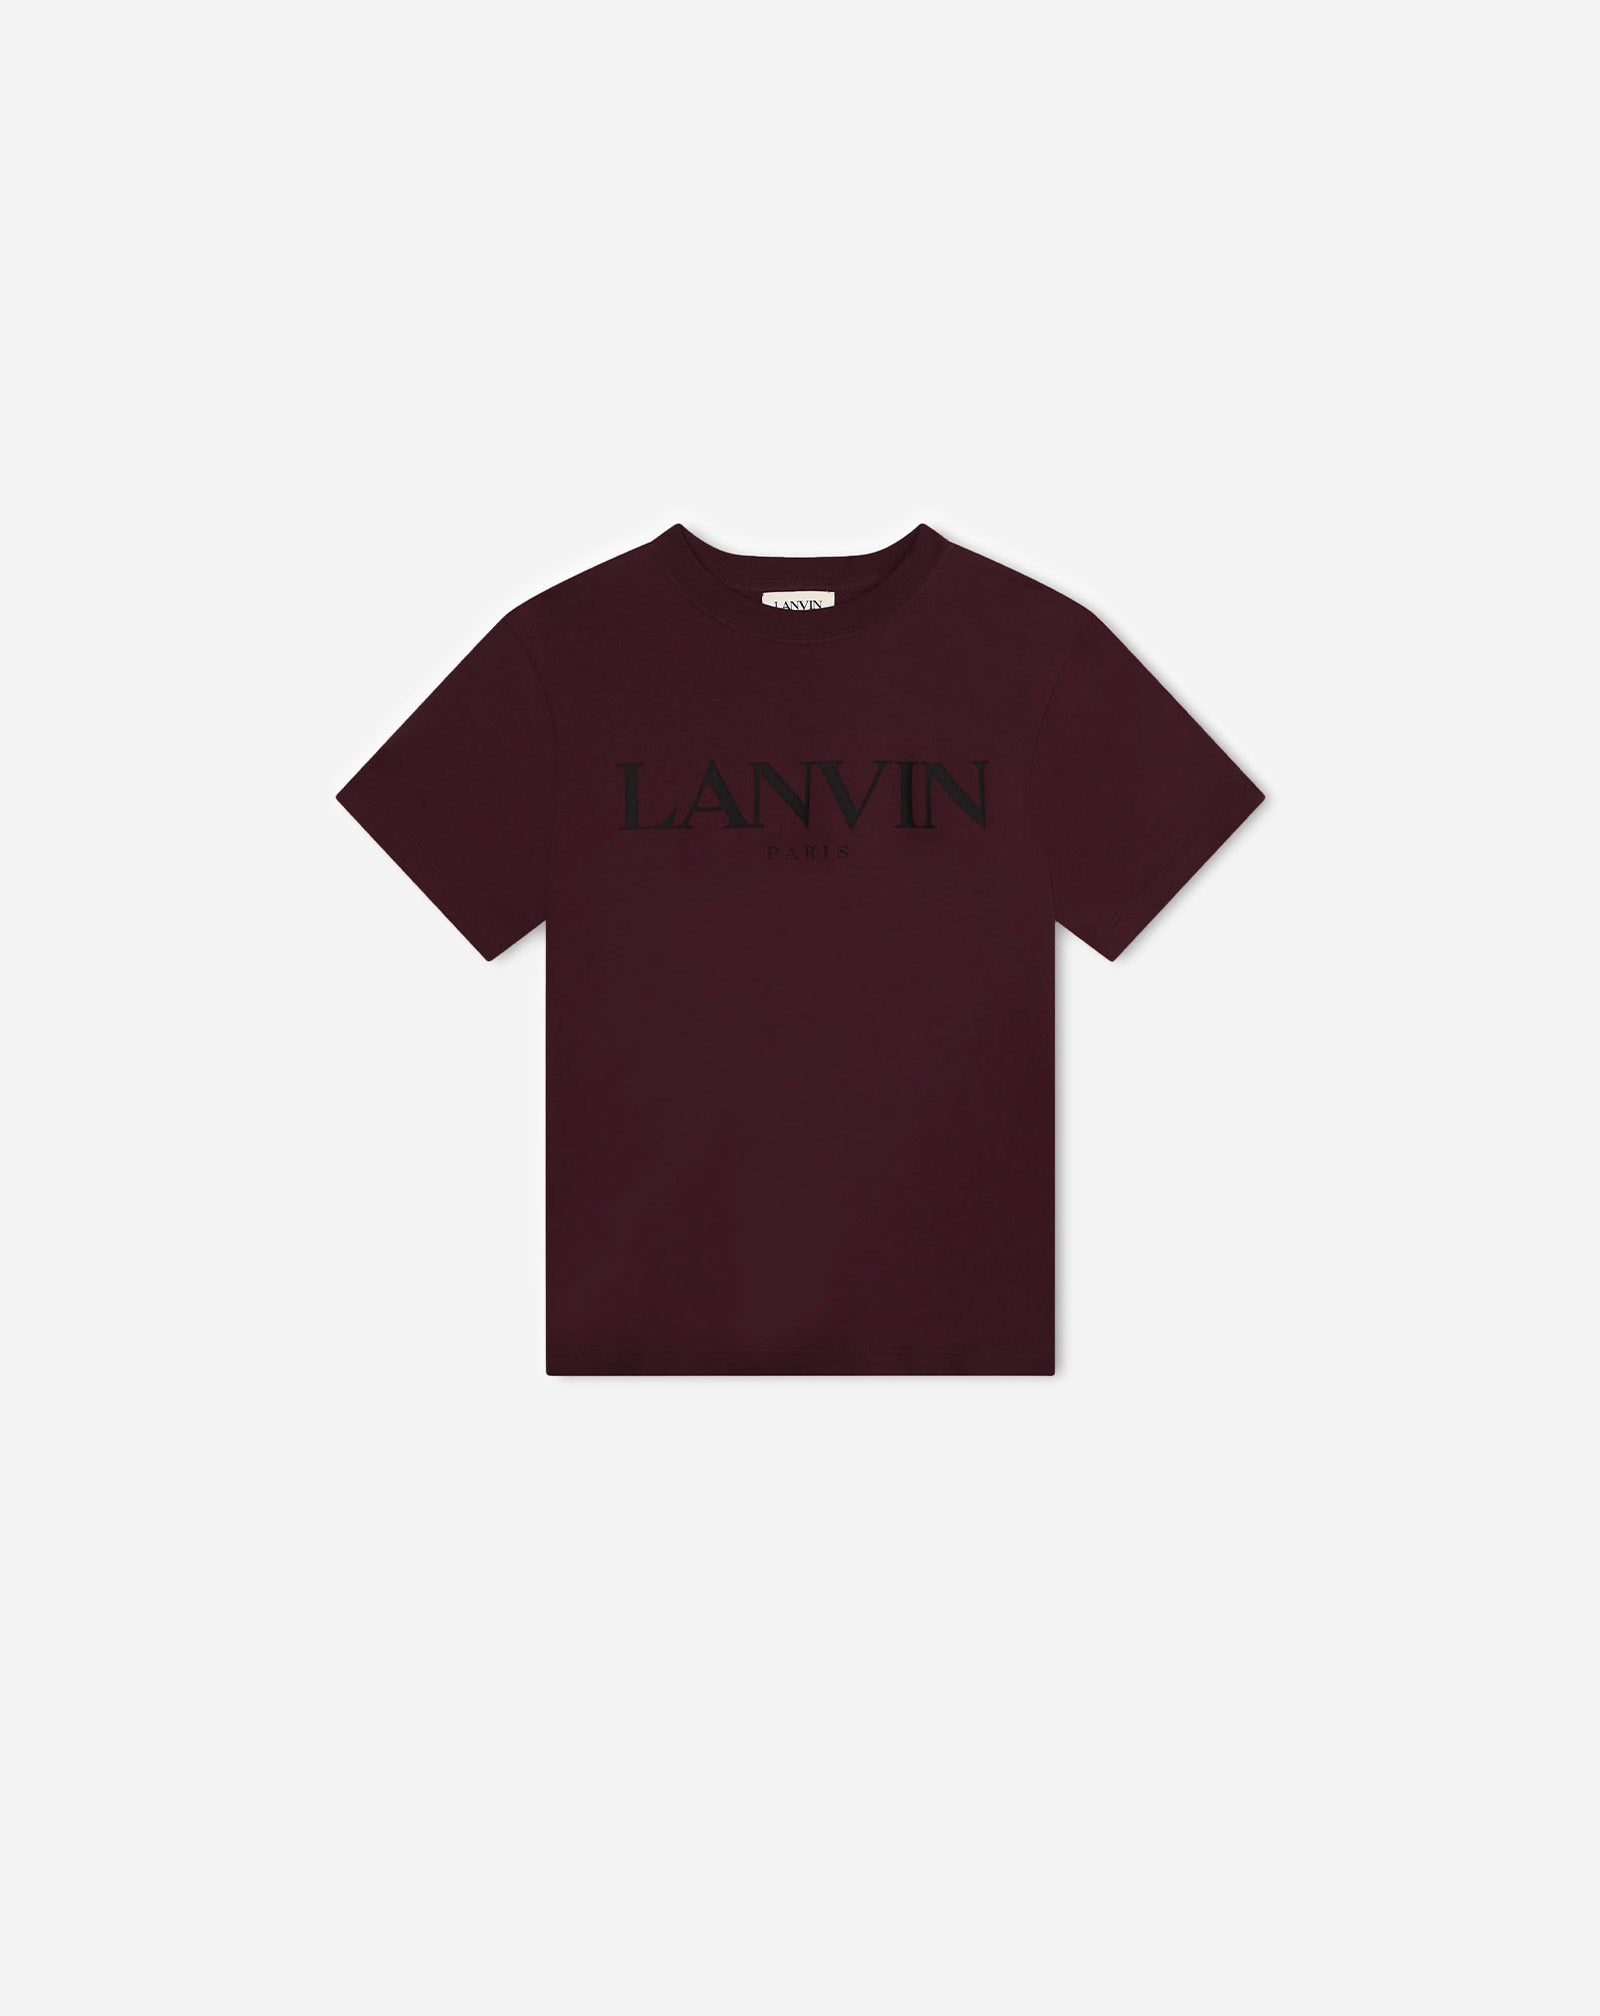 T-SHIRT WITH PRINTED LOGO